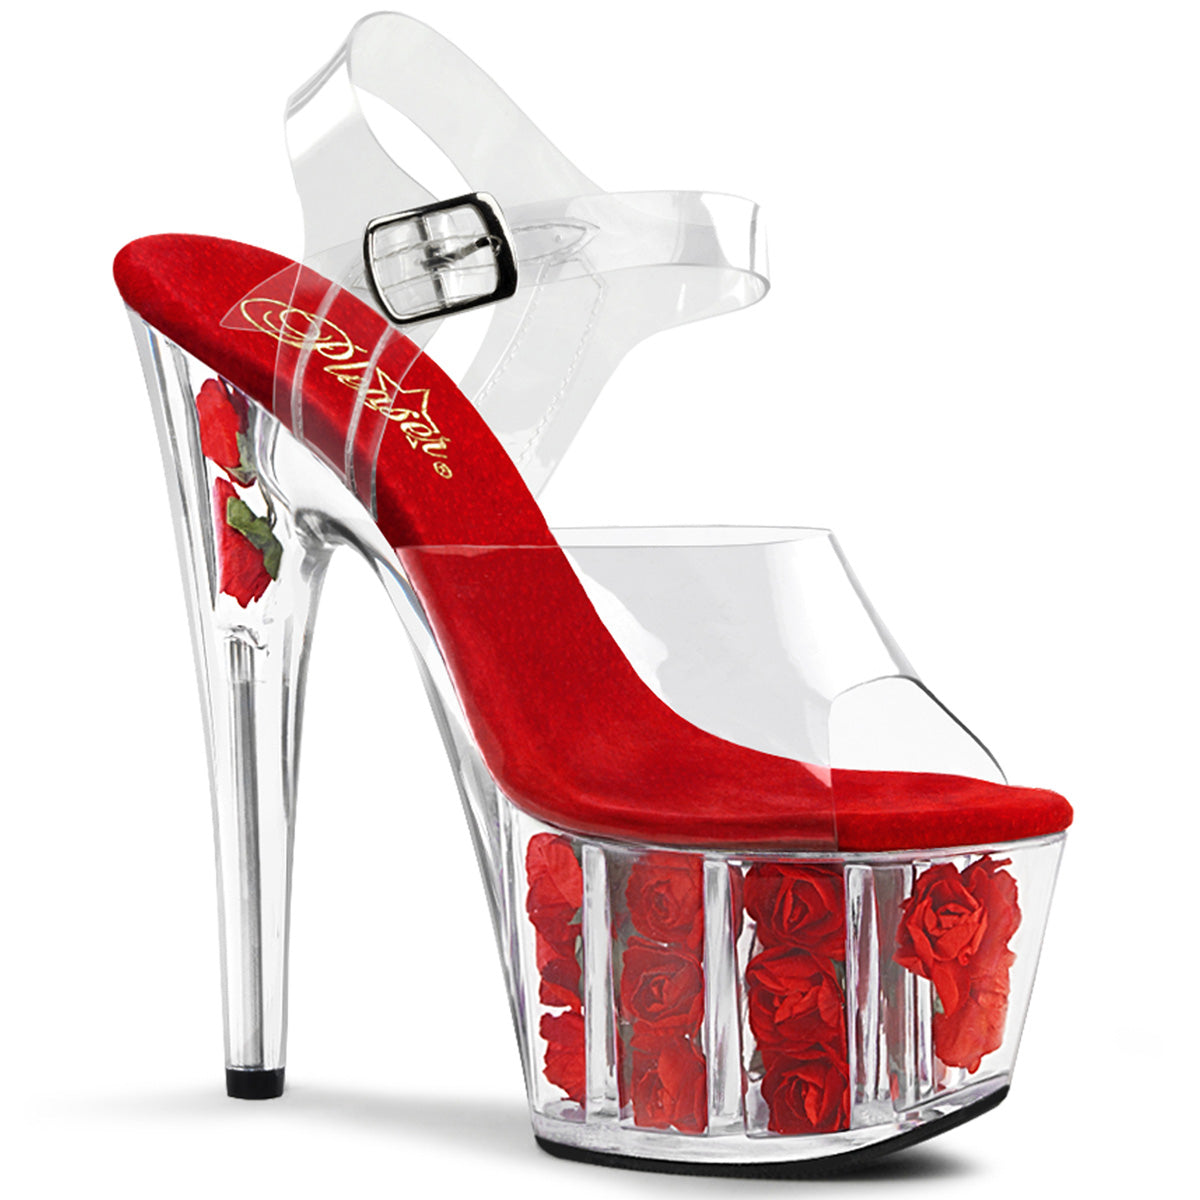 ADORE-708FL Red & Clear Ankle Peep Toe High Heel